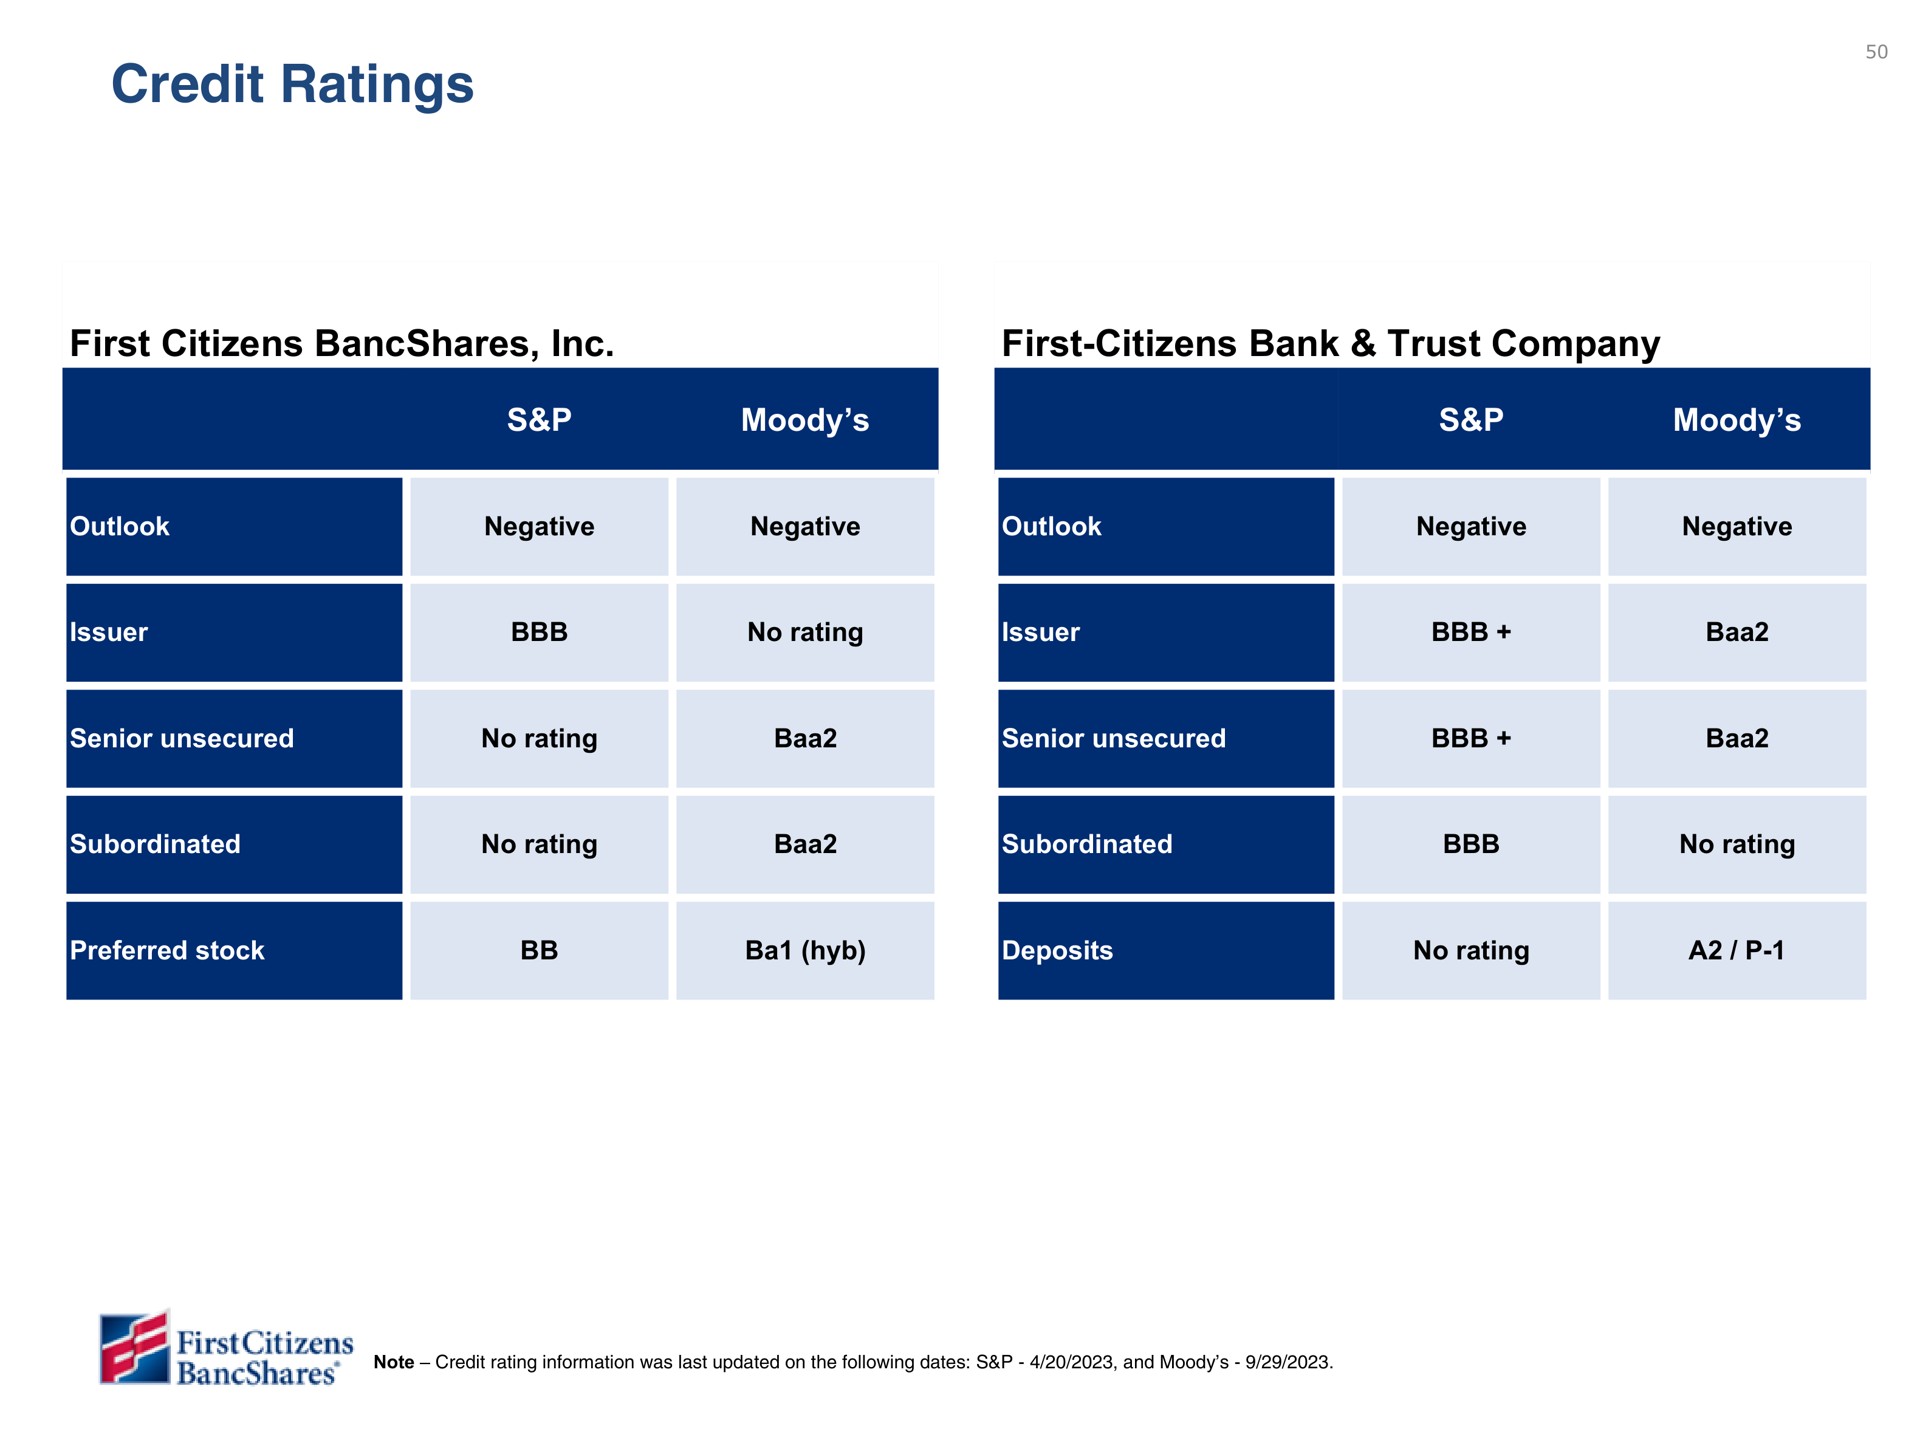 credit ratings first citizens first citizens bank trust company | First Citizens BancShares